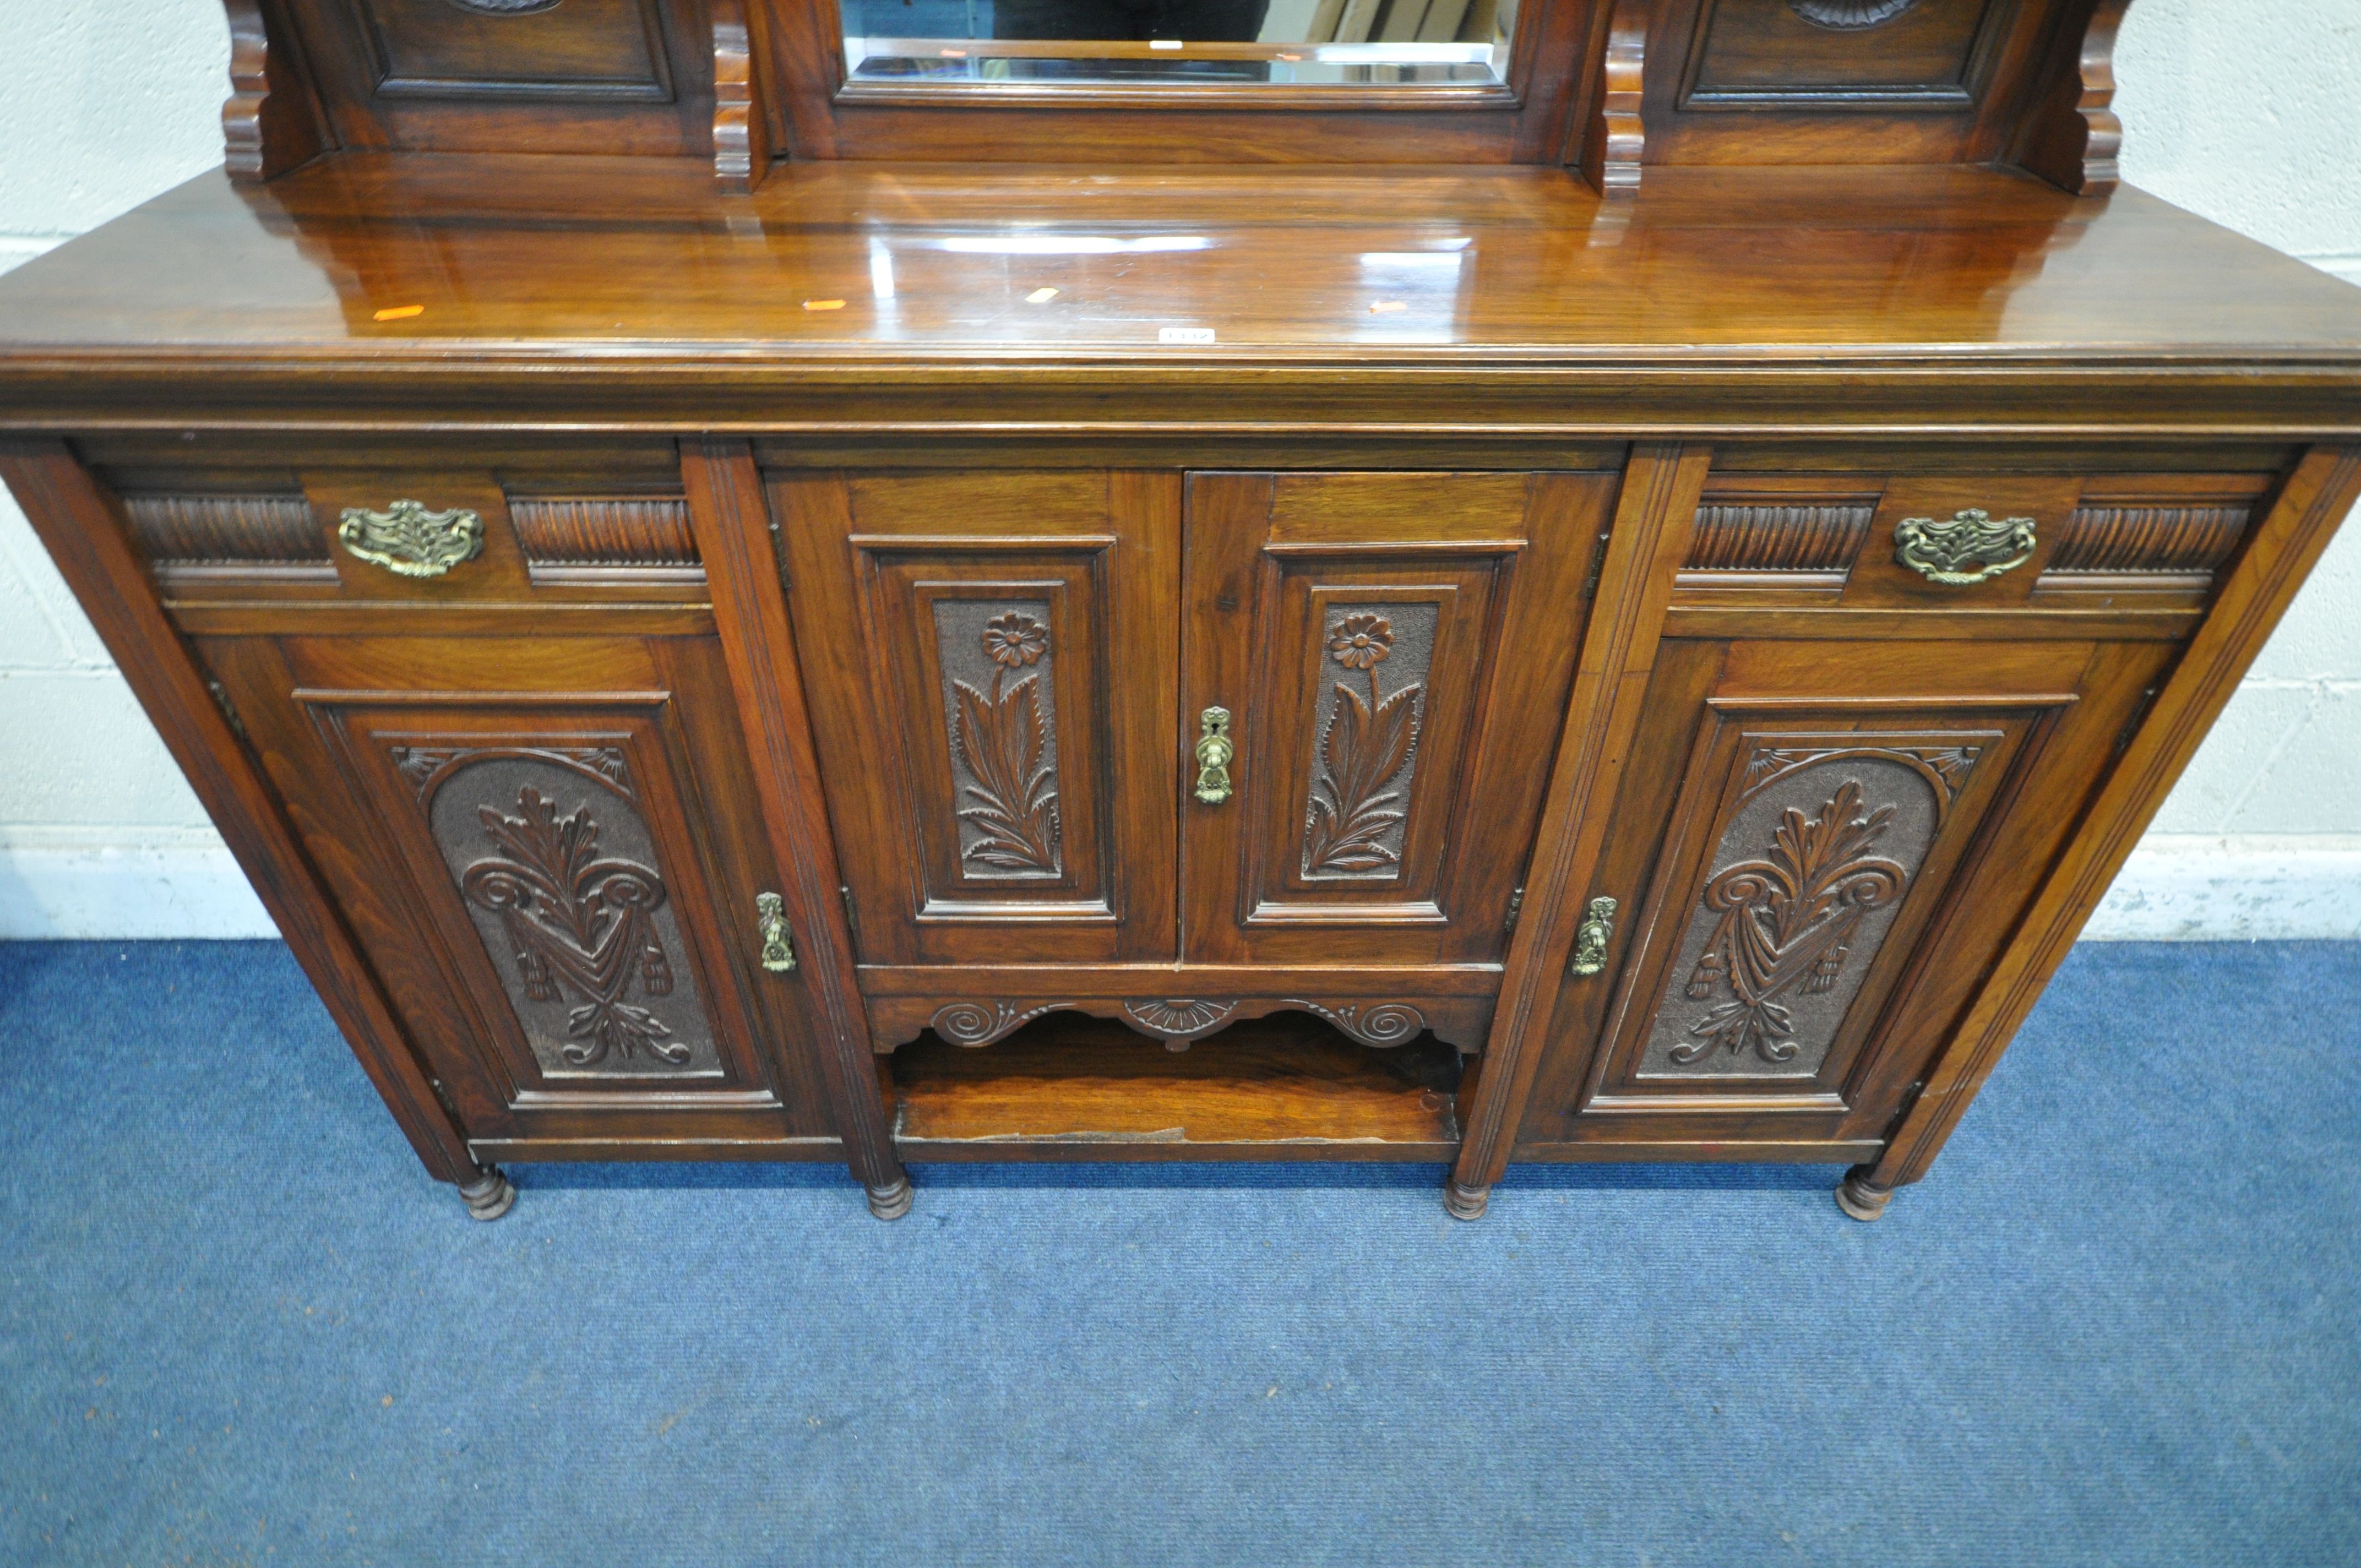 AN EDWARDIAN MAHOGANY MIRROR BACK SIDEBOARD, the top with three bevelled mirror plates, scrolled and - Image 5 of 6